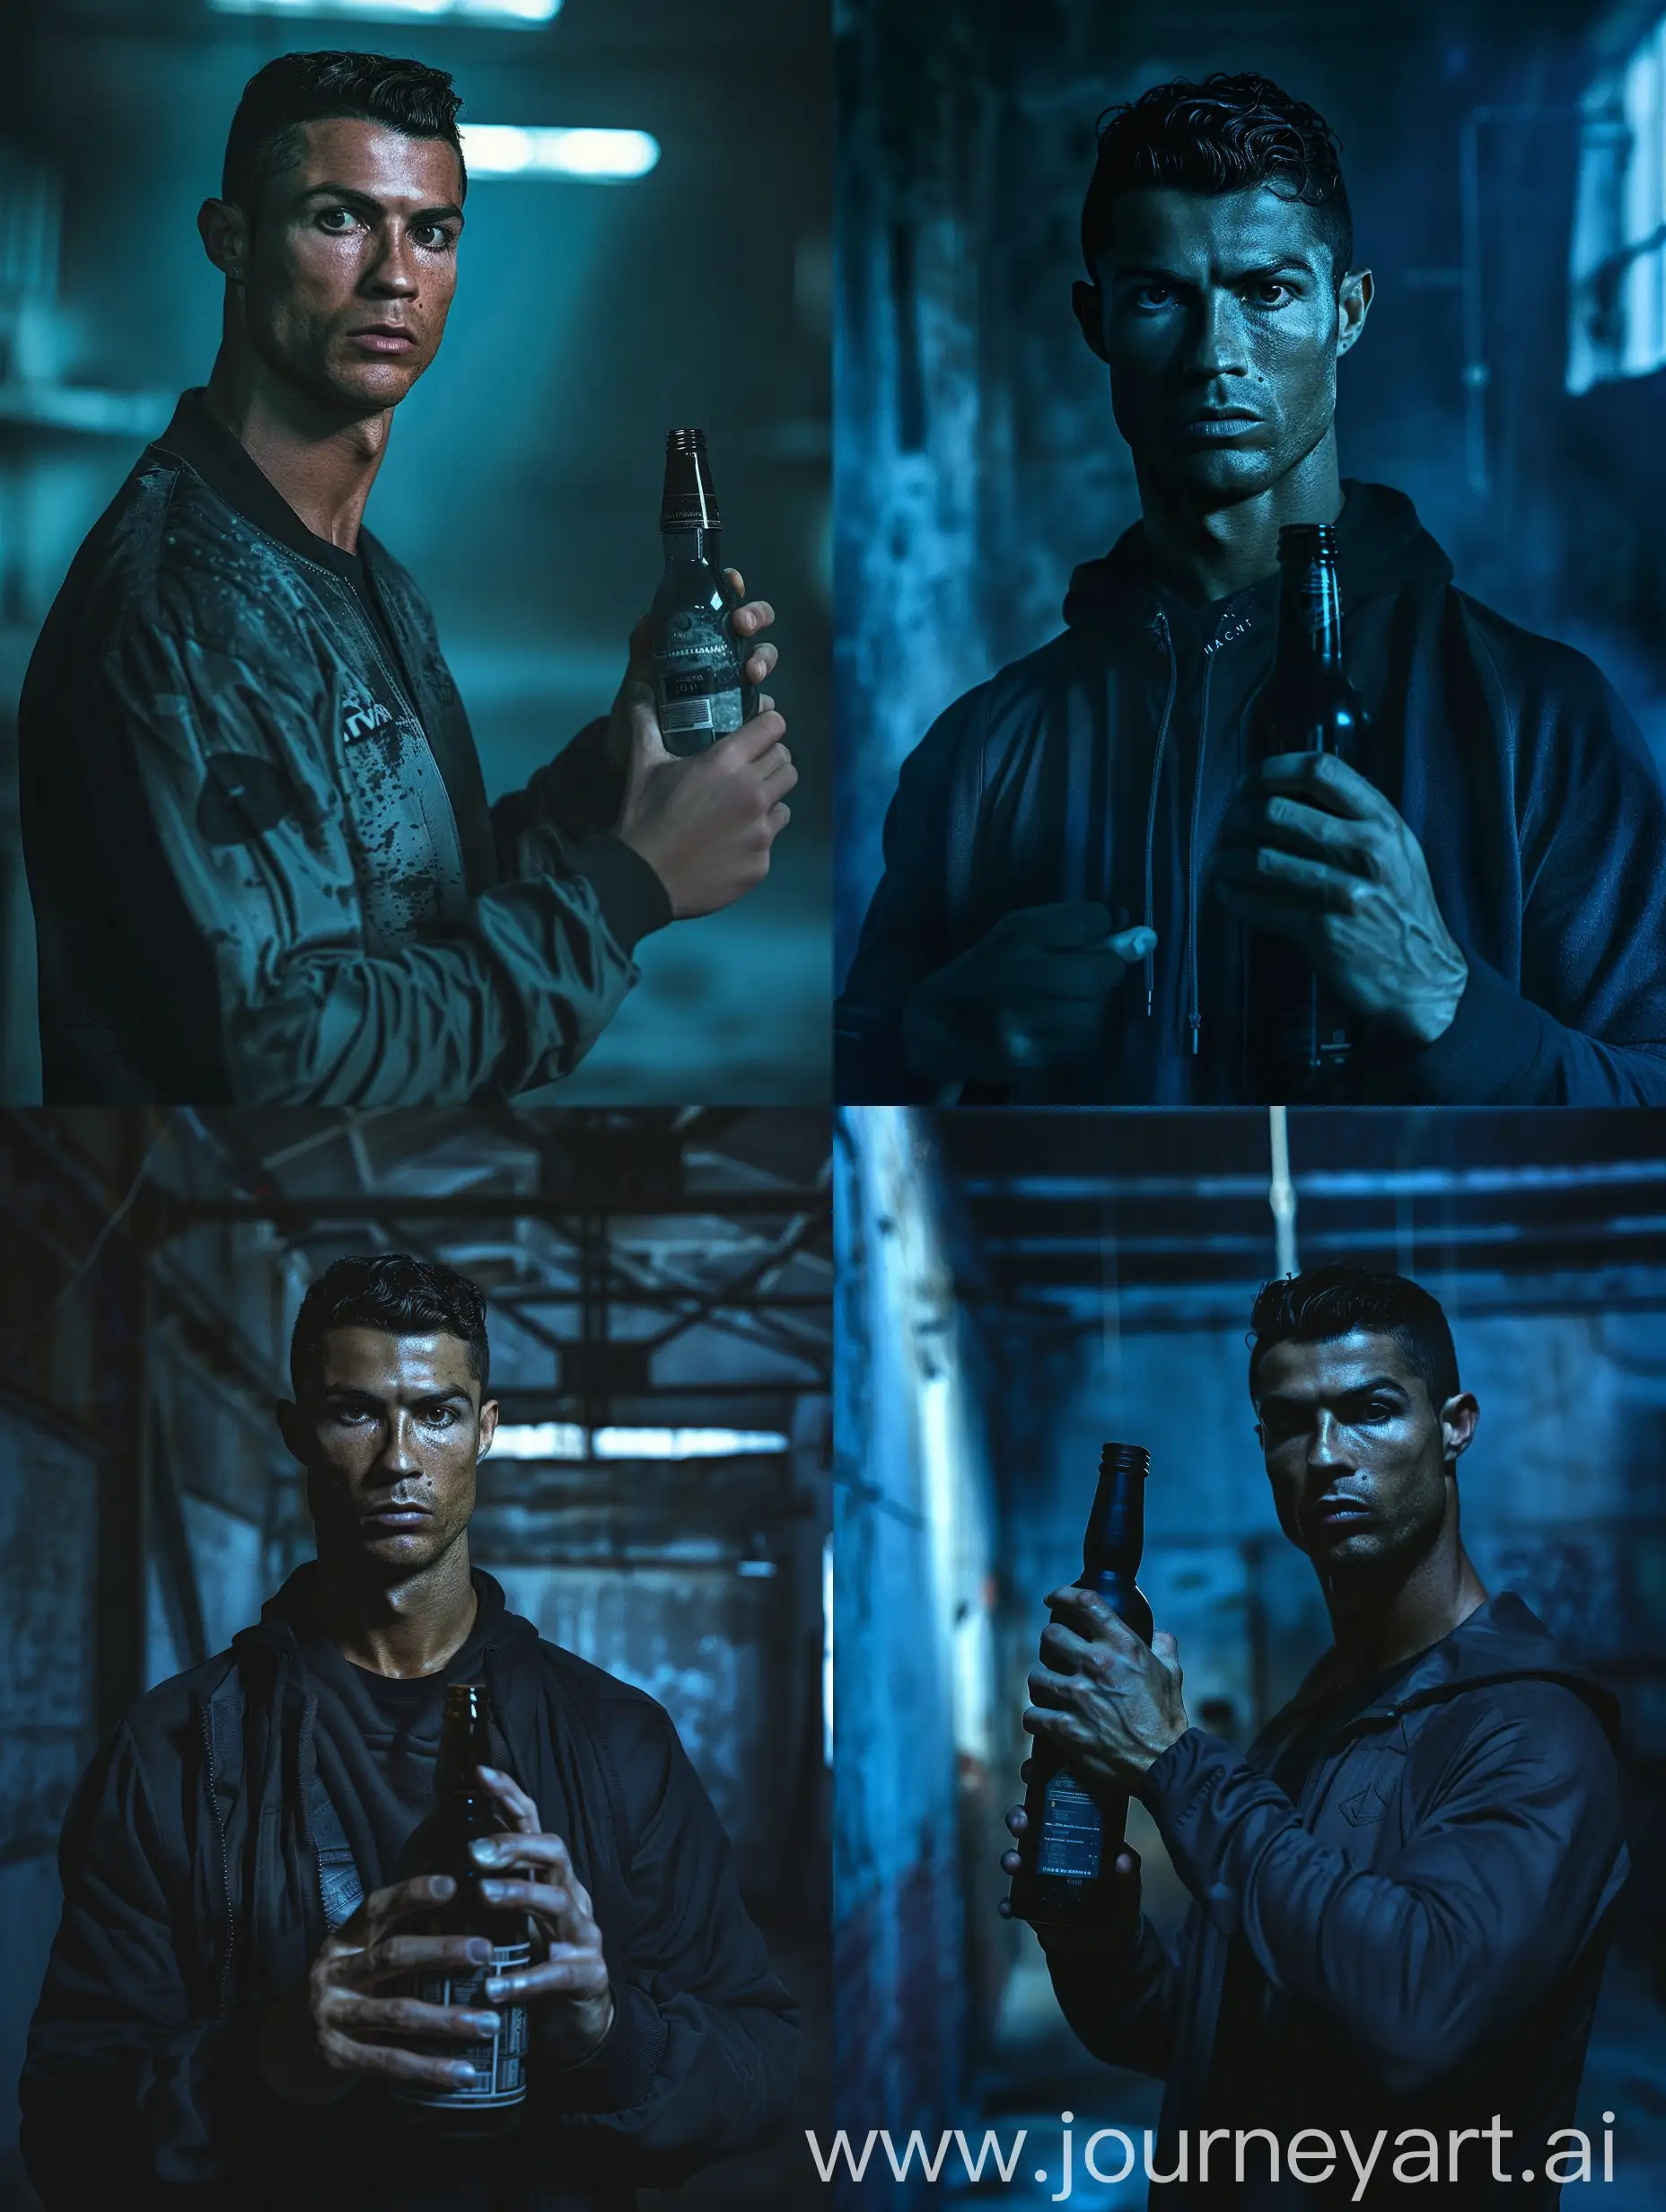 Cristiano-Ronaldo-Holding-Bottle-with-Precision-Authentic-Portrait-by-Steve-McCurry